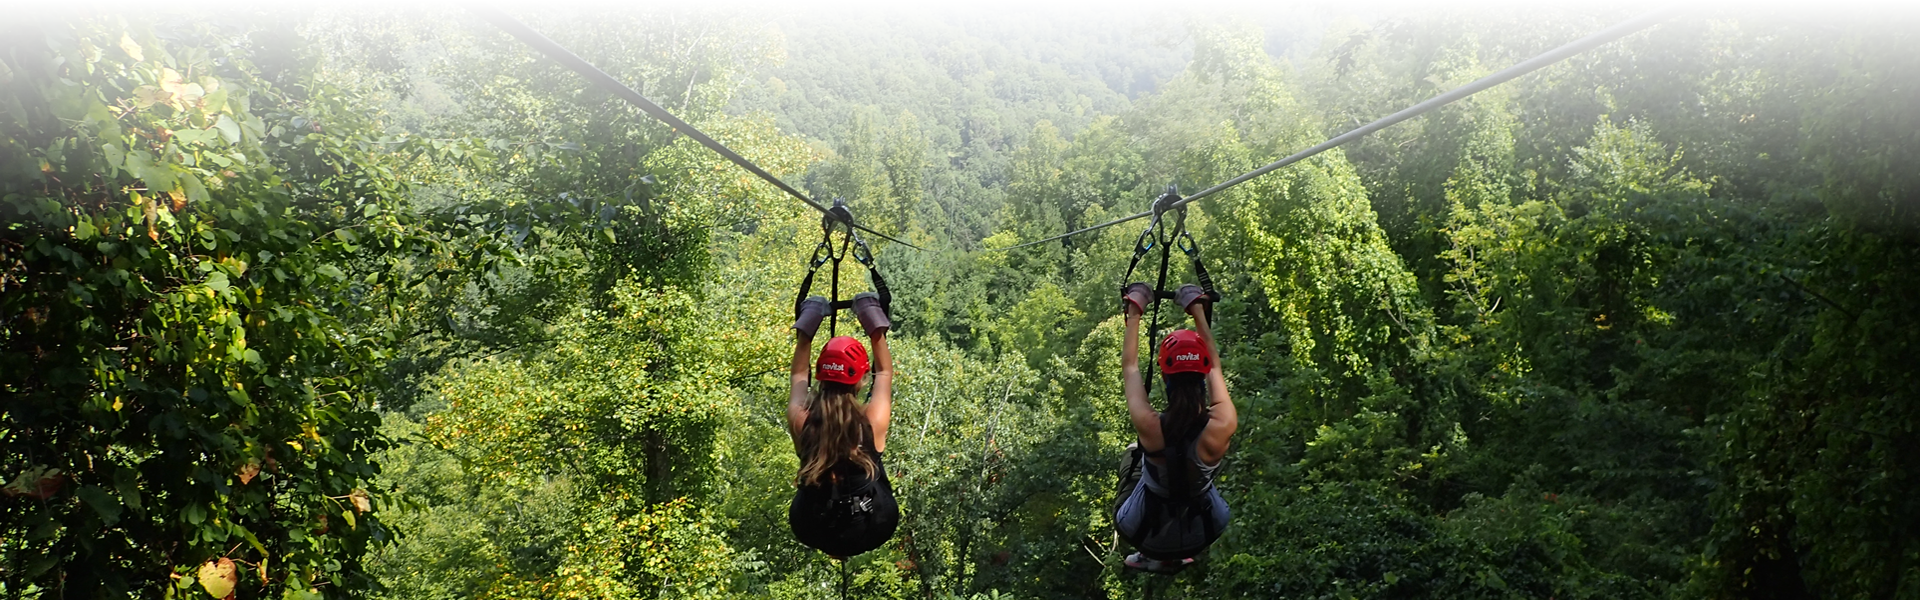 Two women ziplining down towards an area filled with trees